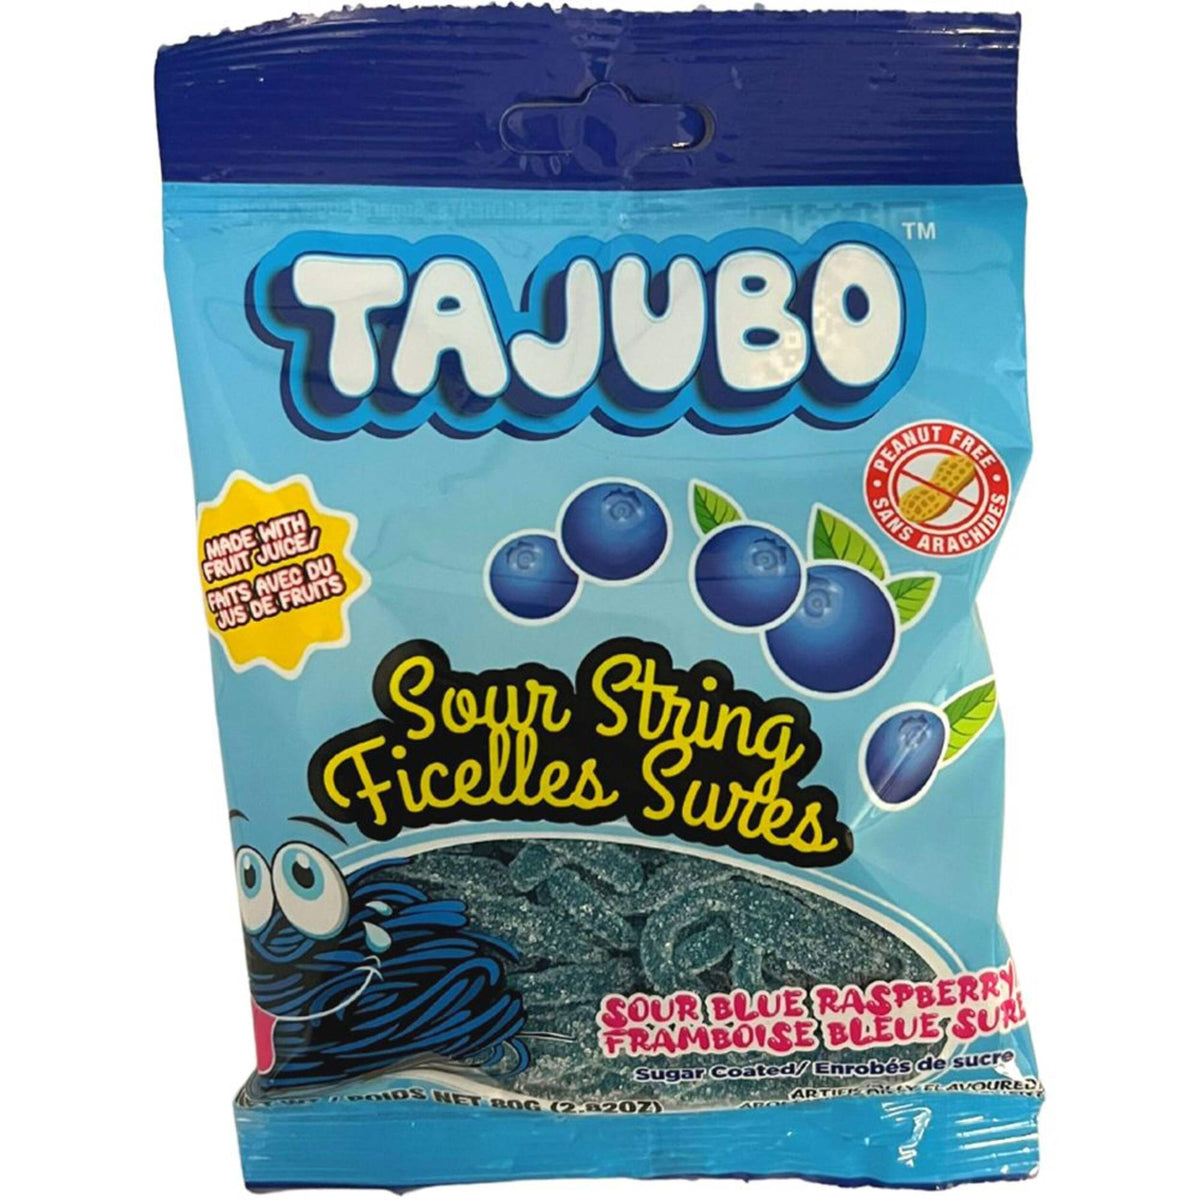 EXCLUSIVE CANDY & NOVELTY DISTRIBUTING LTD Impulse Buying Tajubo Sour Strings, Blue Raspberry, 1 Count 060631928371